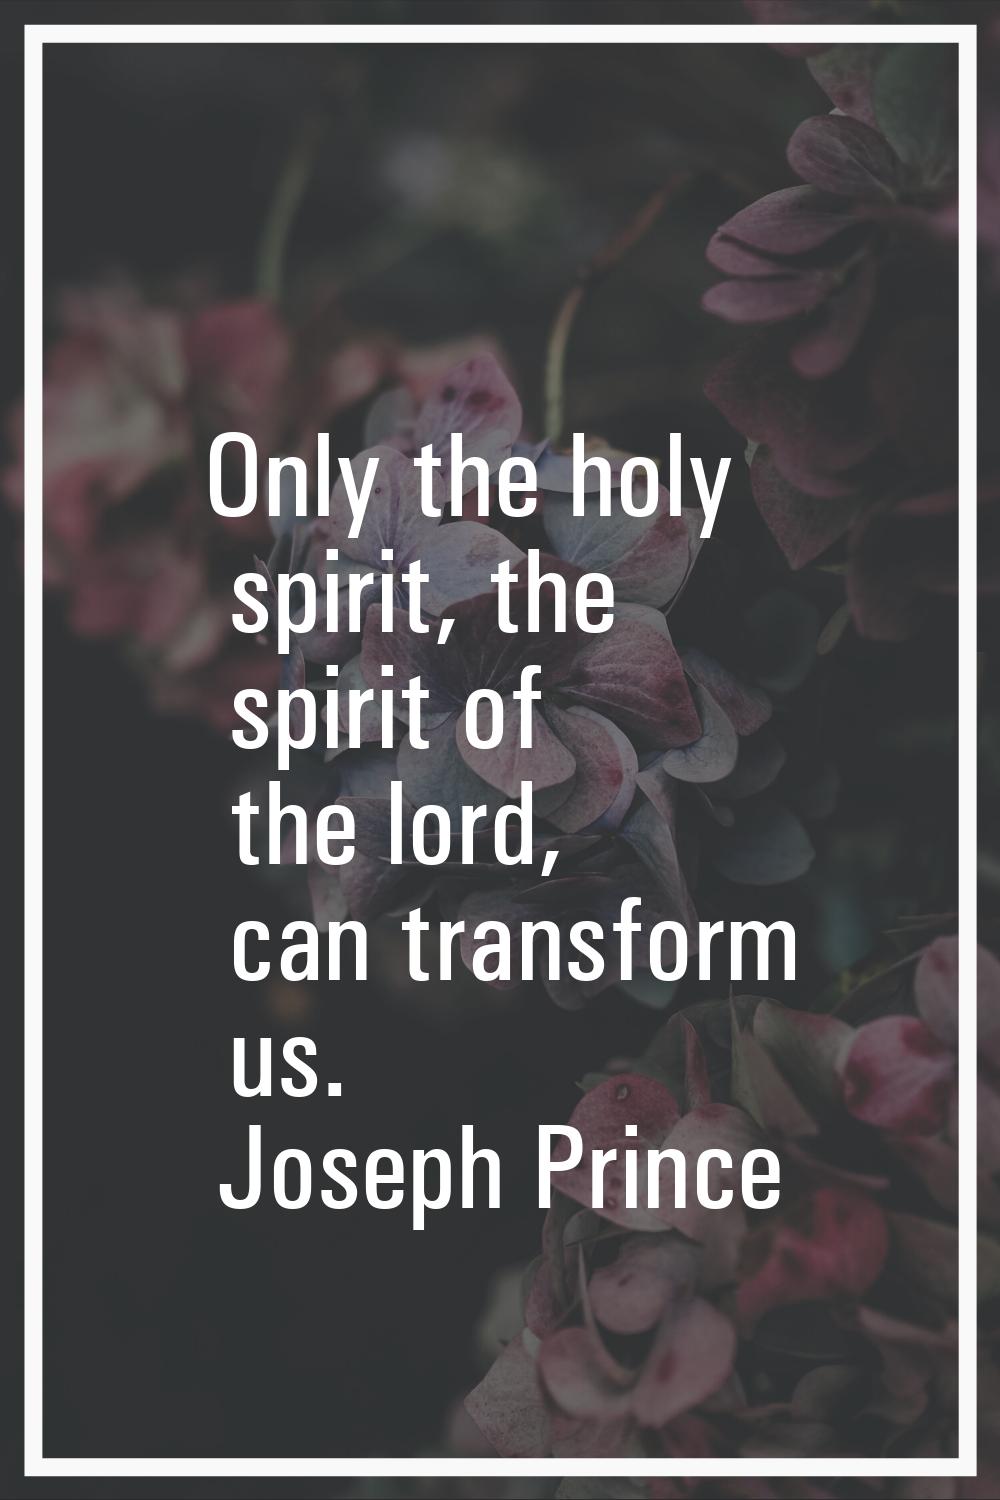 Only the holy spirit, the spirit of the lord, can transform us.